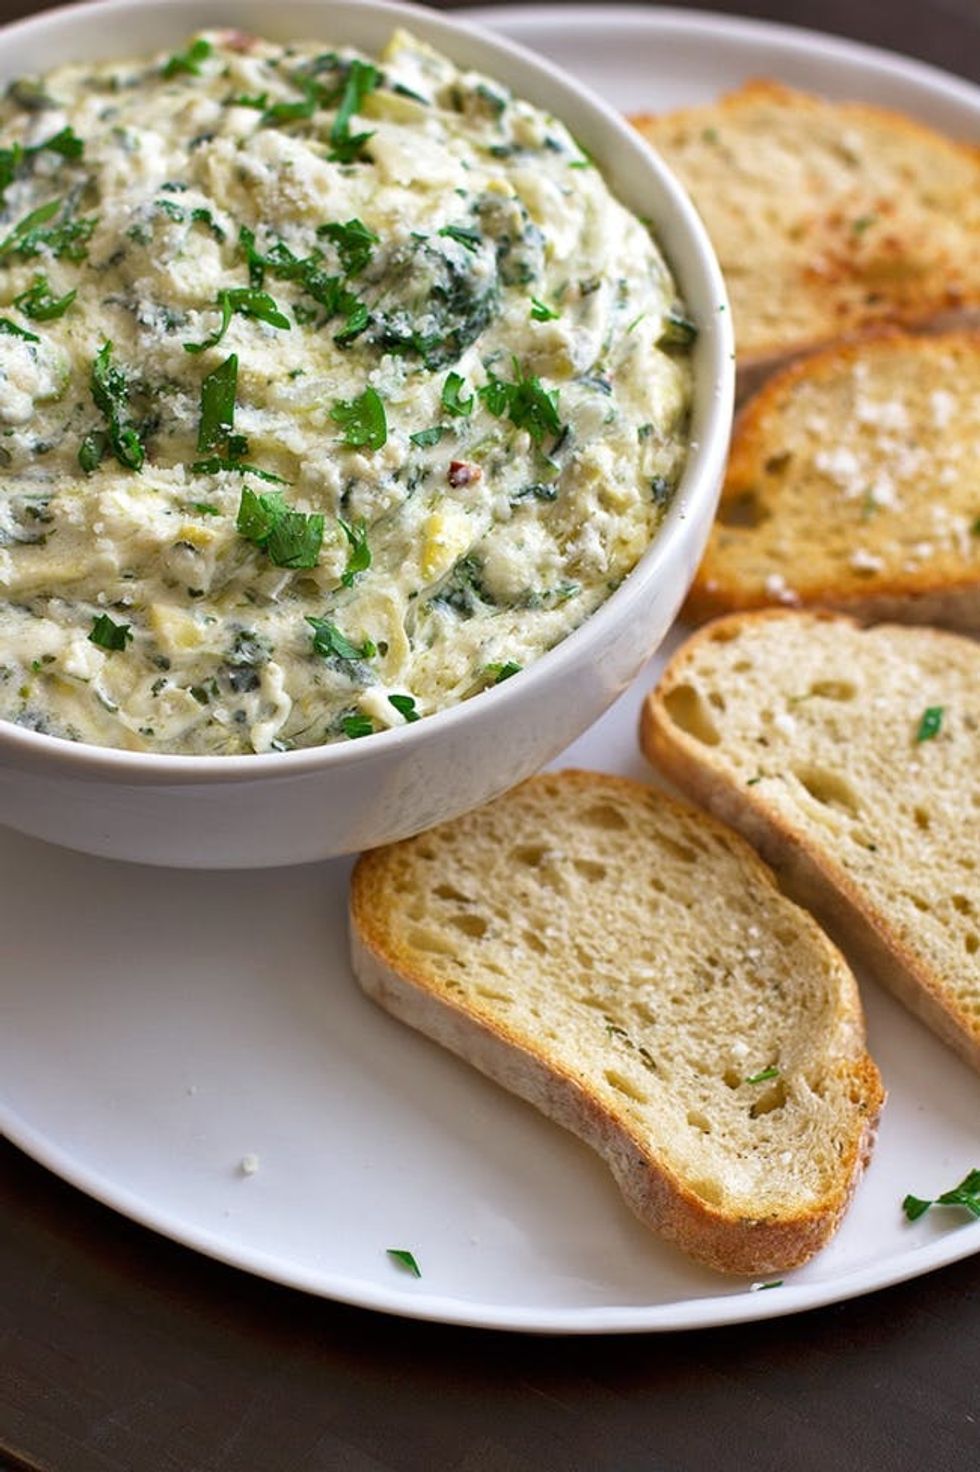 Spicy Spinach Artichoke Dip in the Slow-Cooker